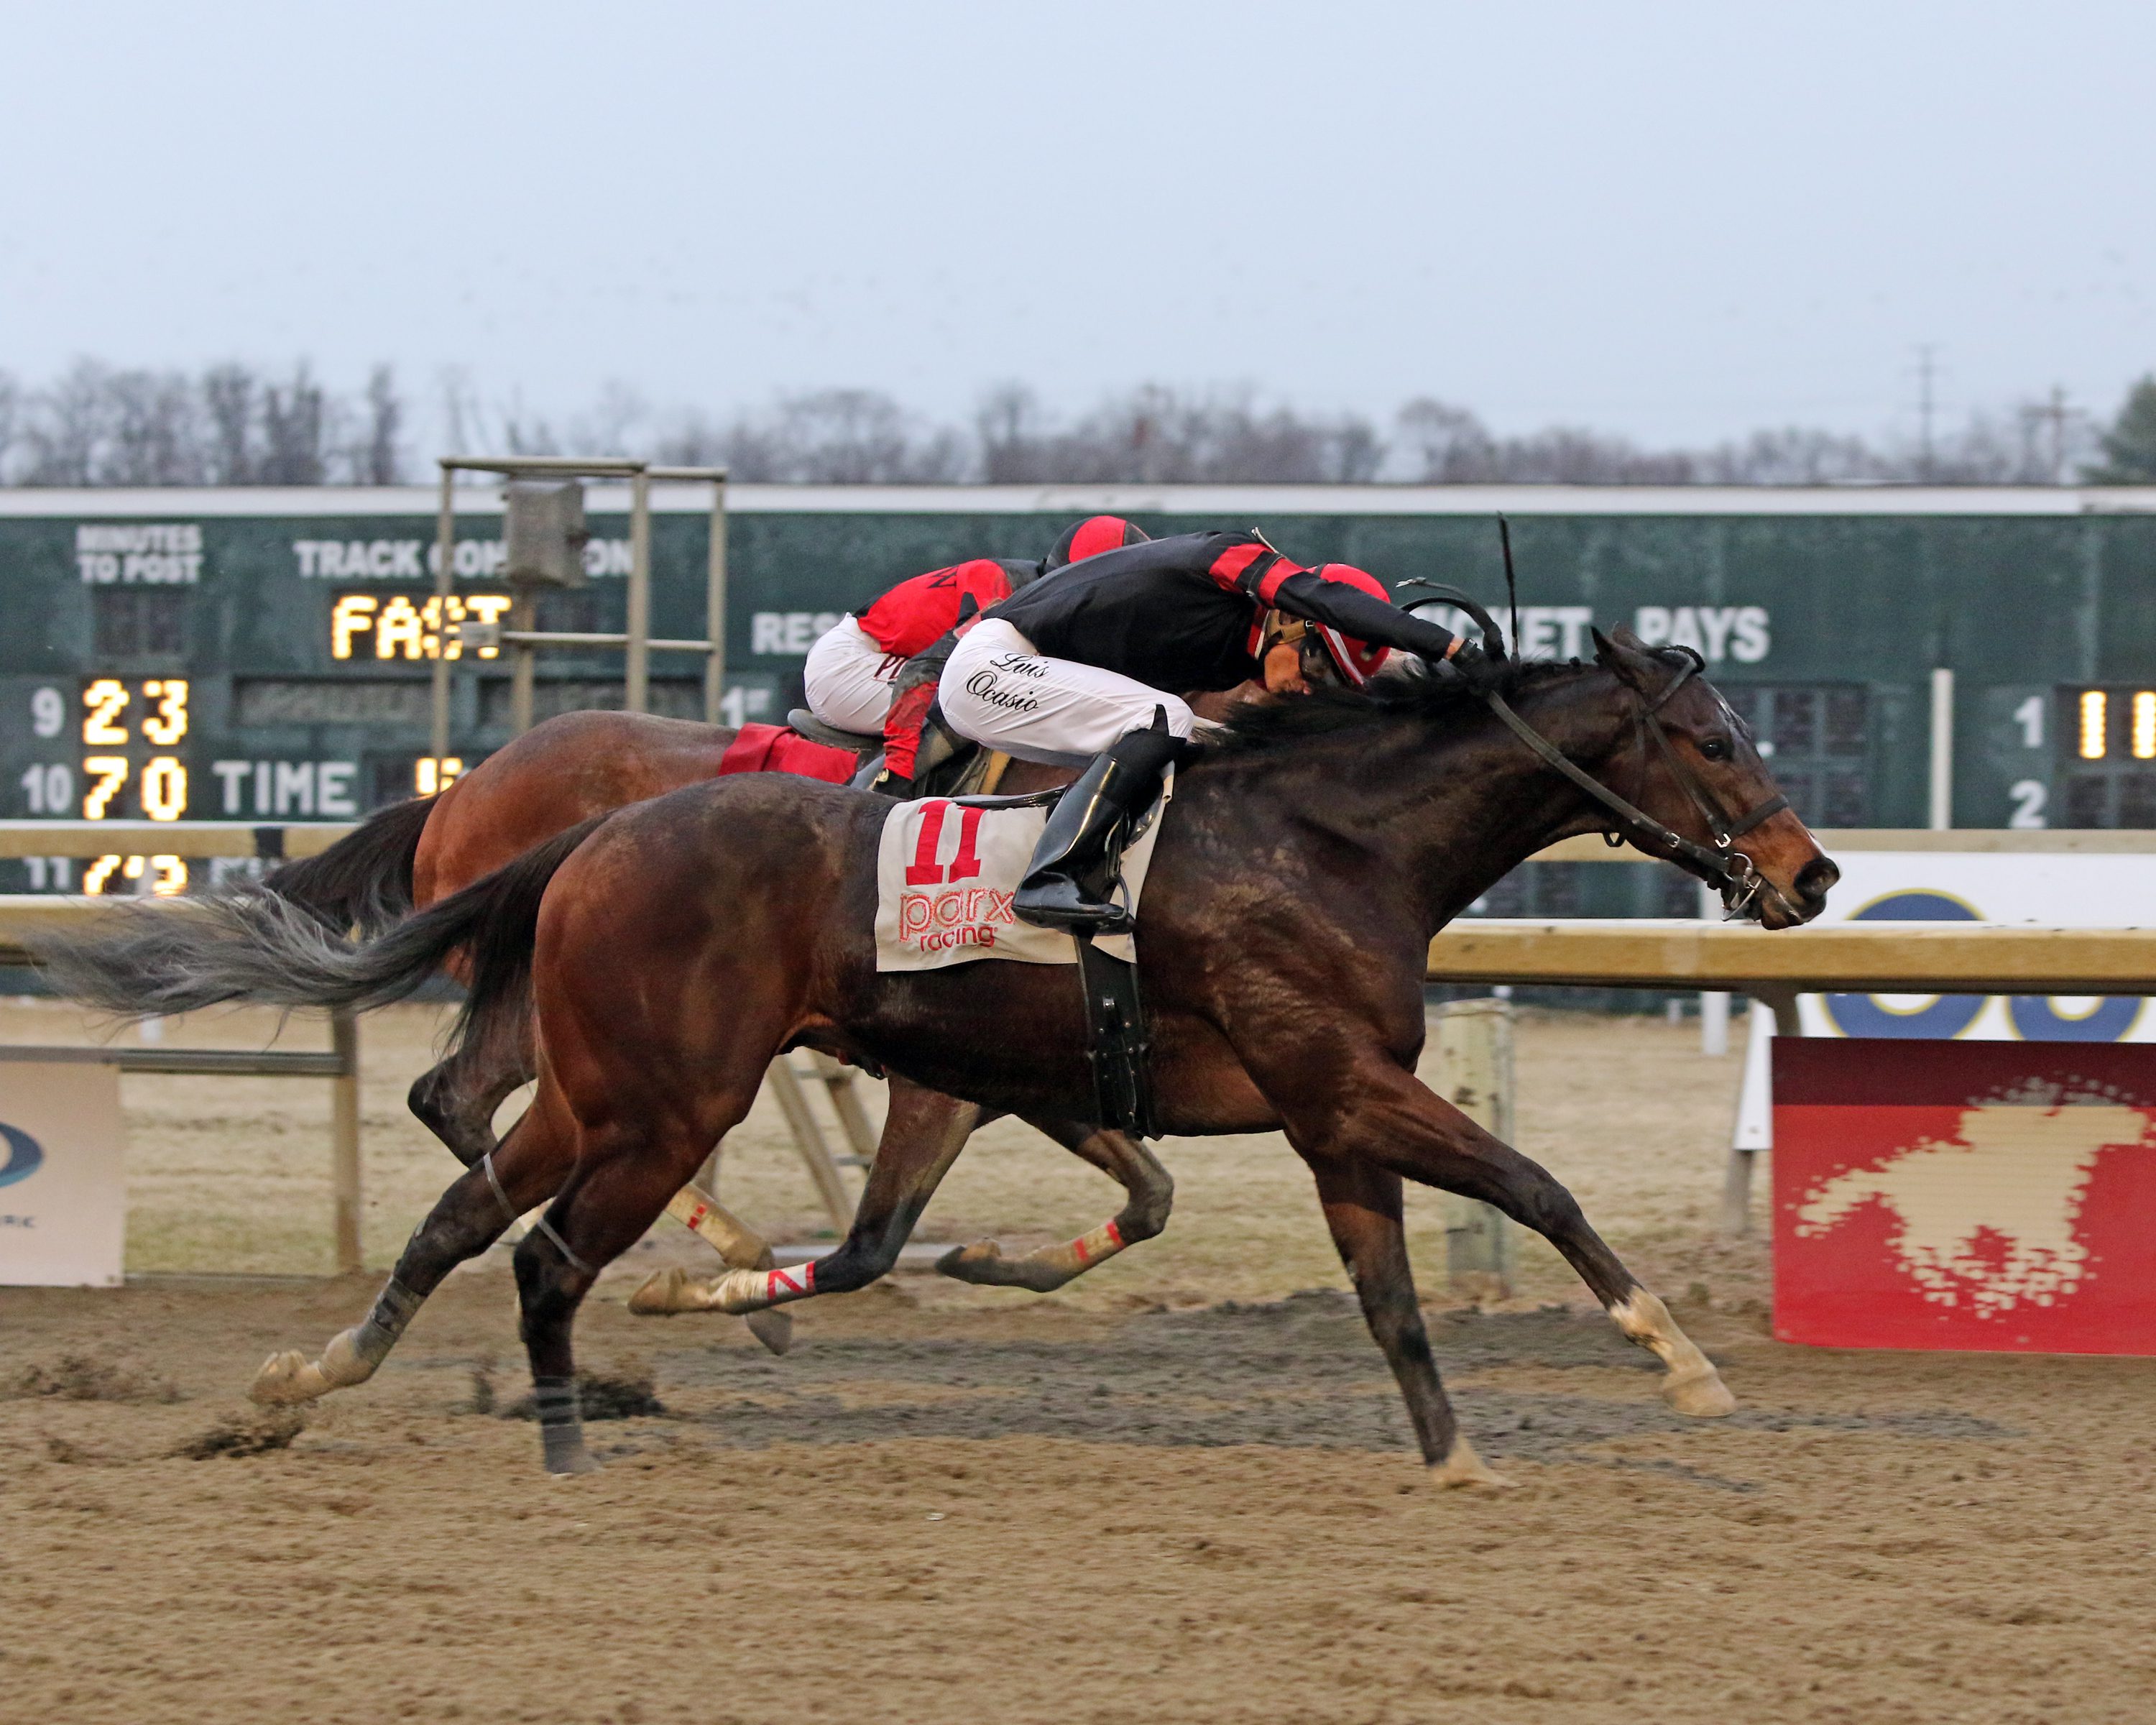 Hollywood Jet with Luis Ocasio win The Fishtown at Parx on March 7, 2022. Photo By: Chad B. Harmon